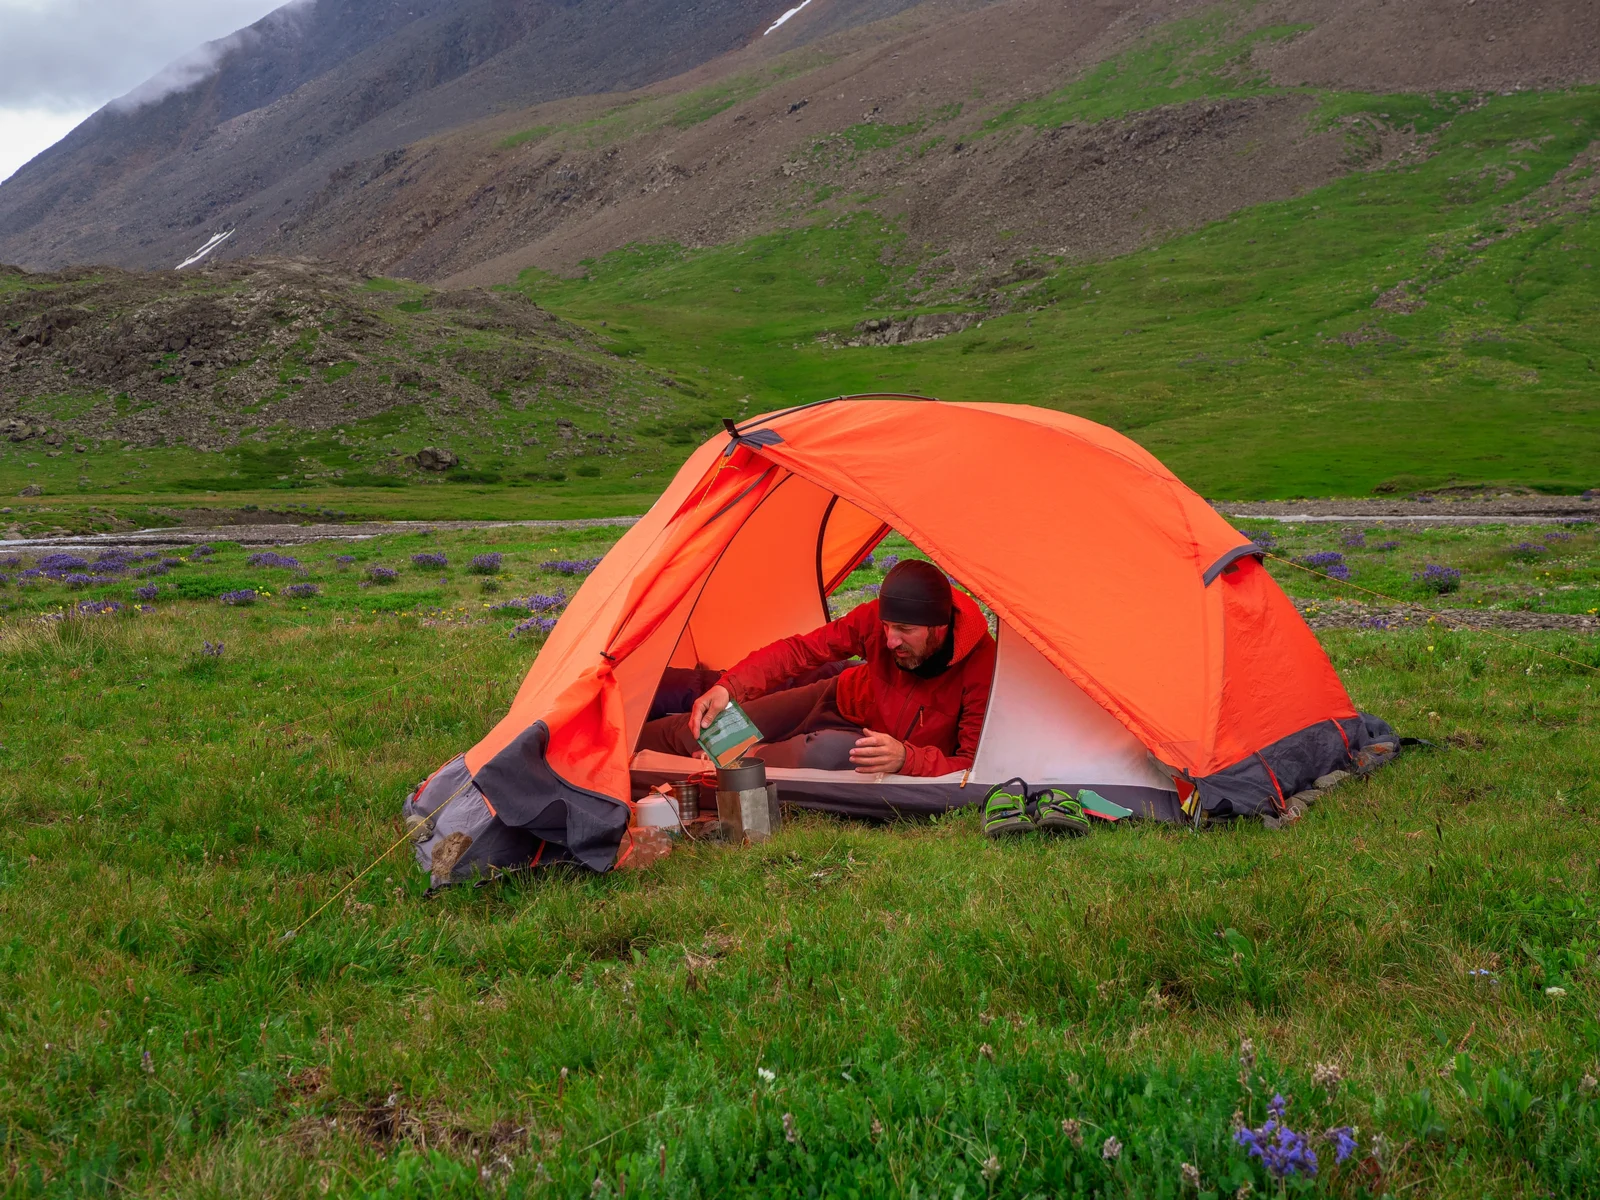 Guy in a hat and and orange tent pouring coffee into a thermos on green grass with purple flowers